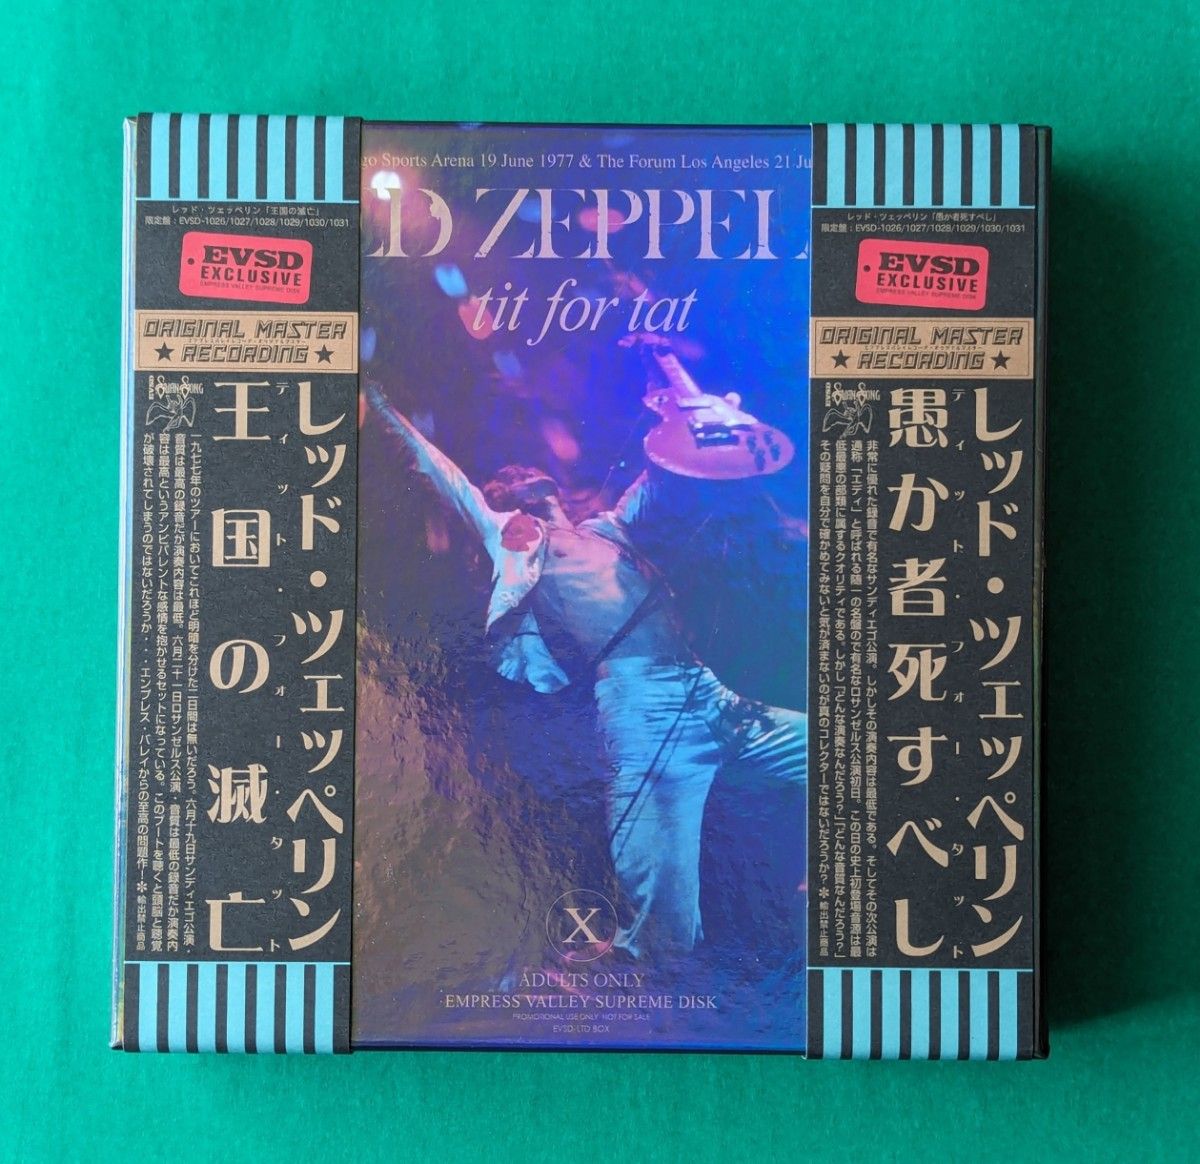 Led Zeppelin / Tit For Tat (9CD BOX) Empress Valley 限定50